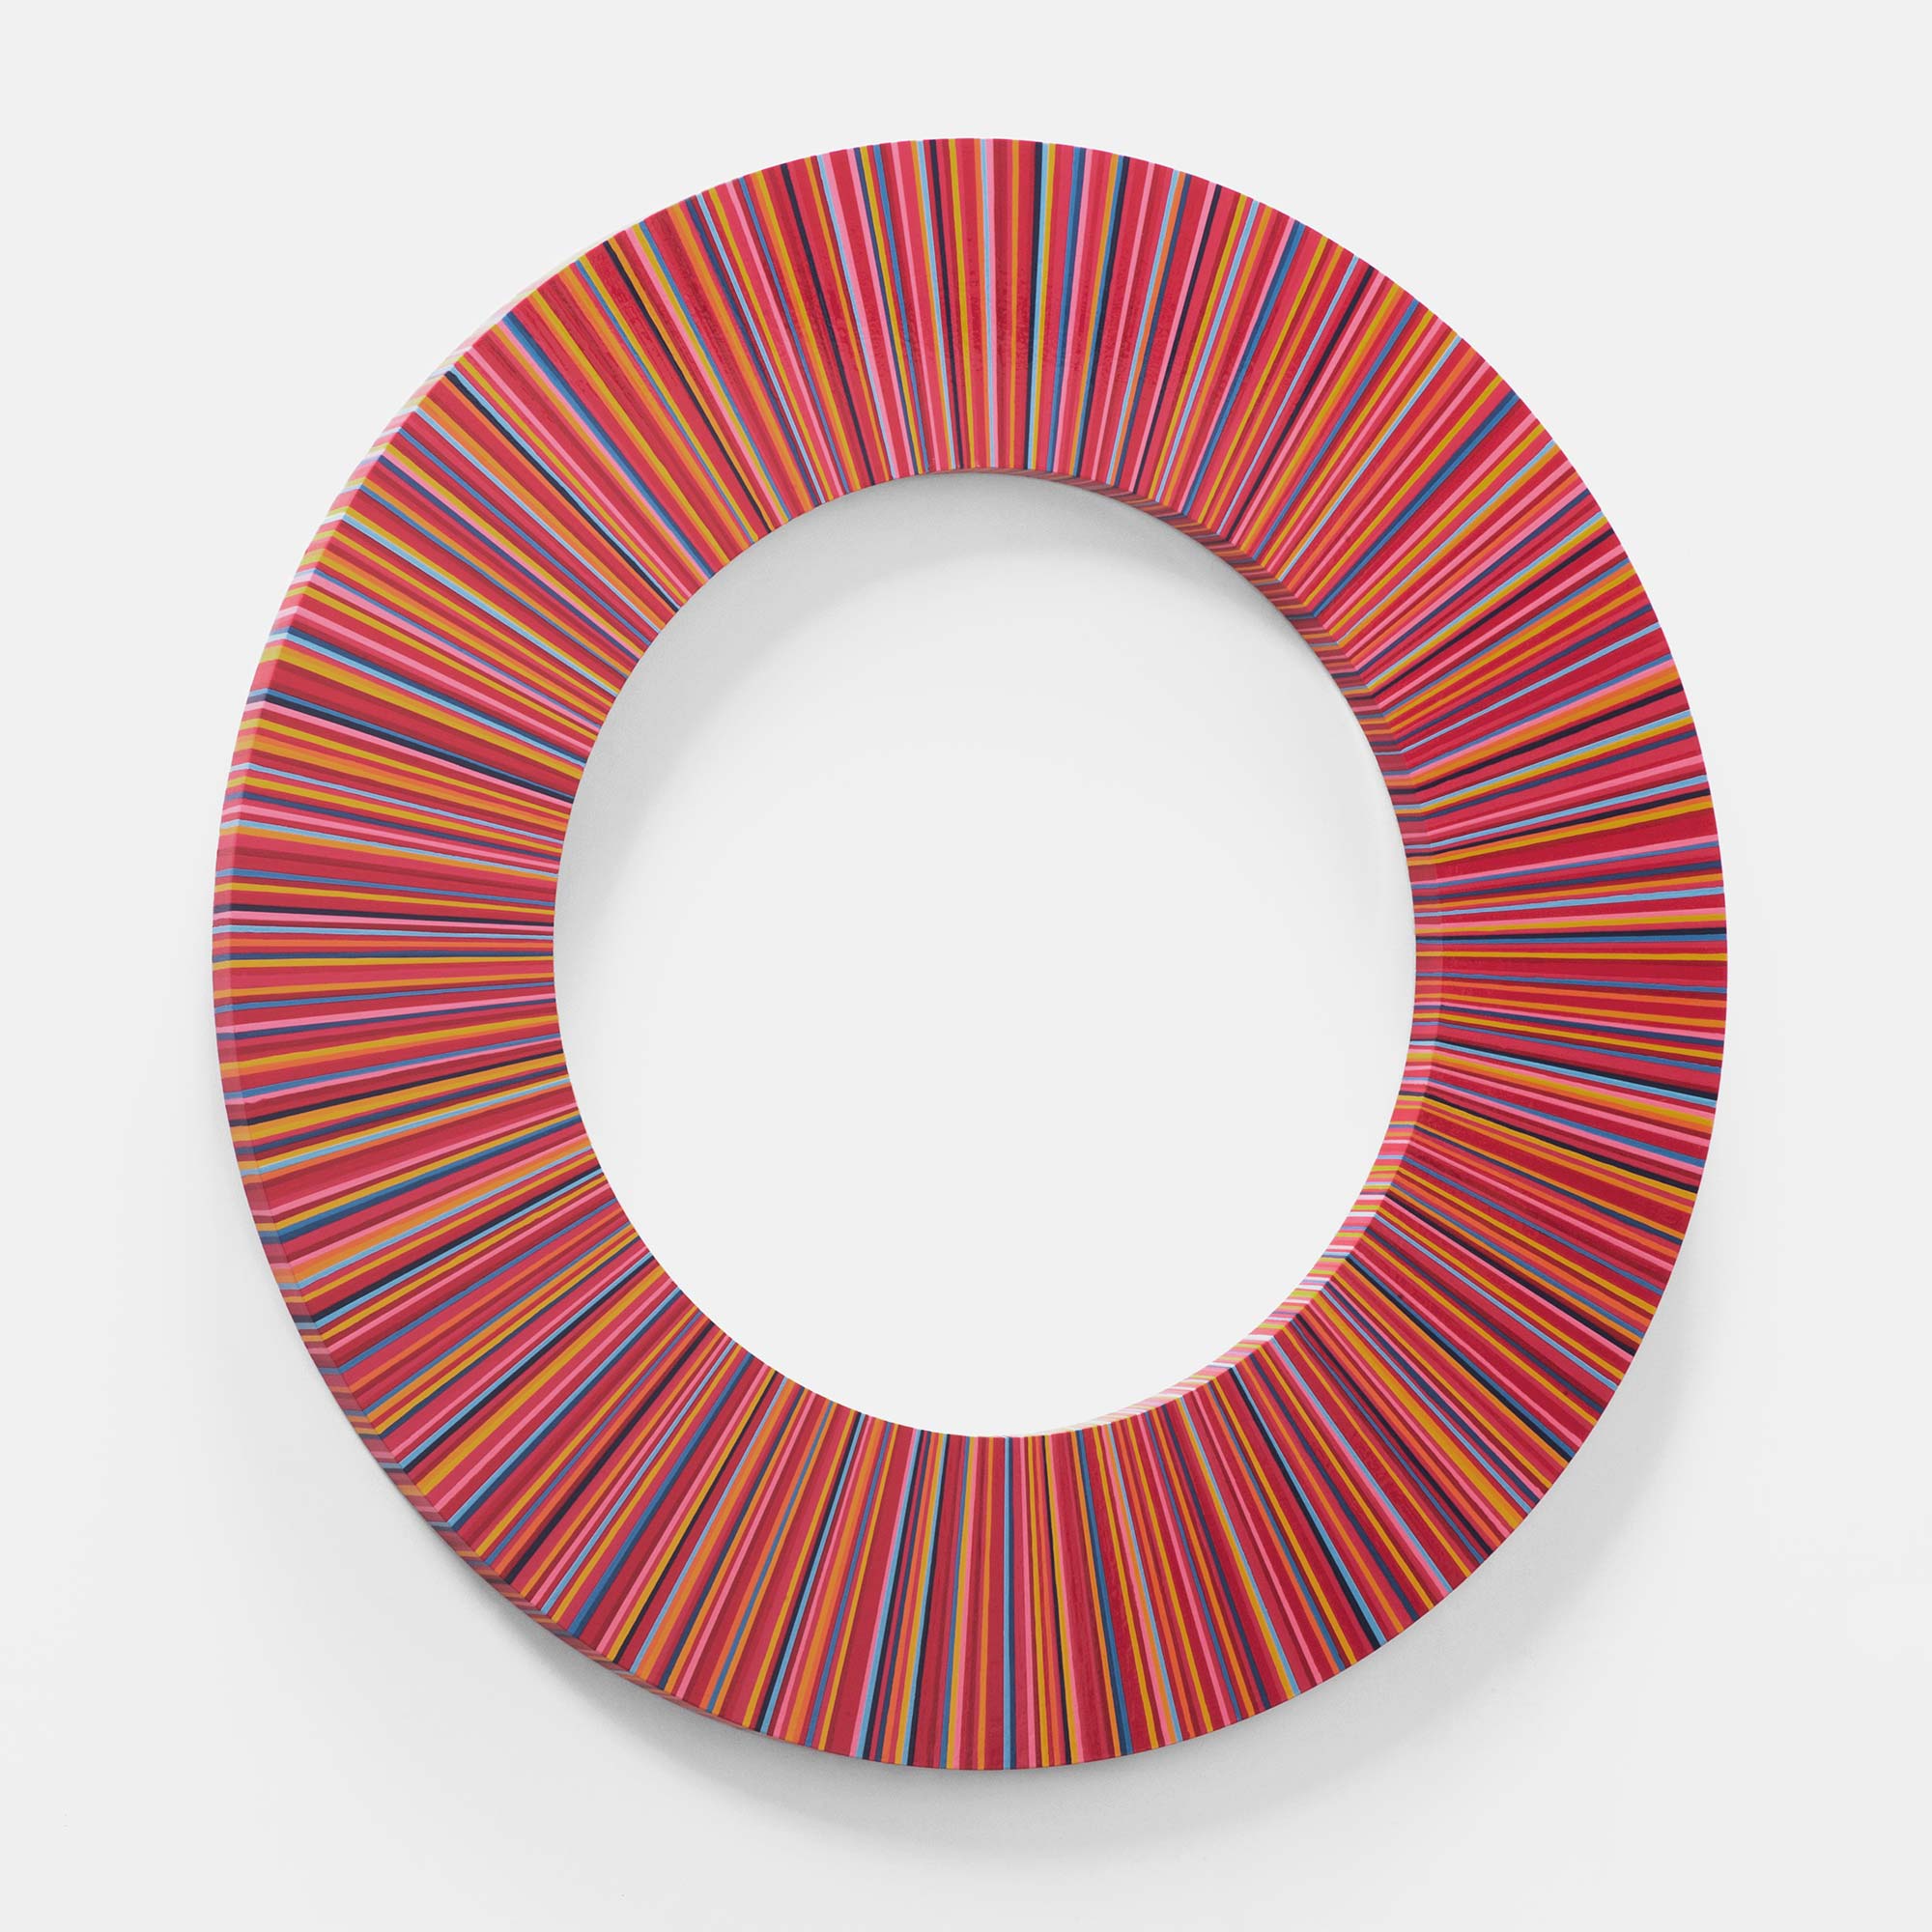 PAINTING (COLOR WHEELS)